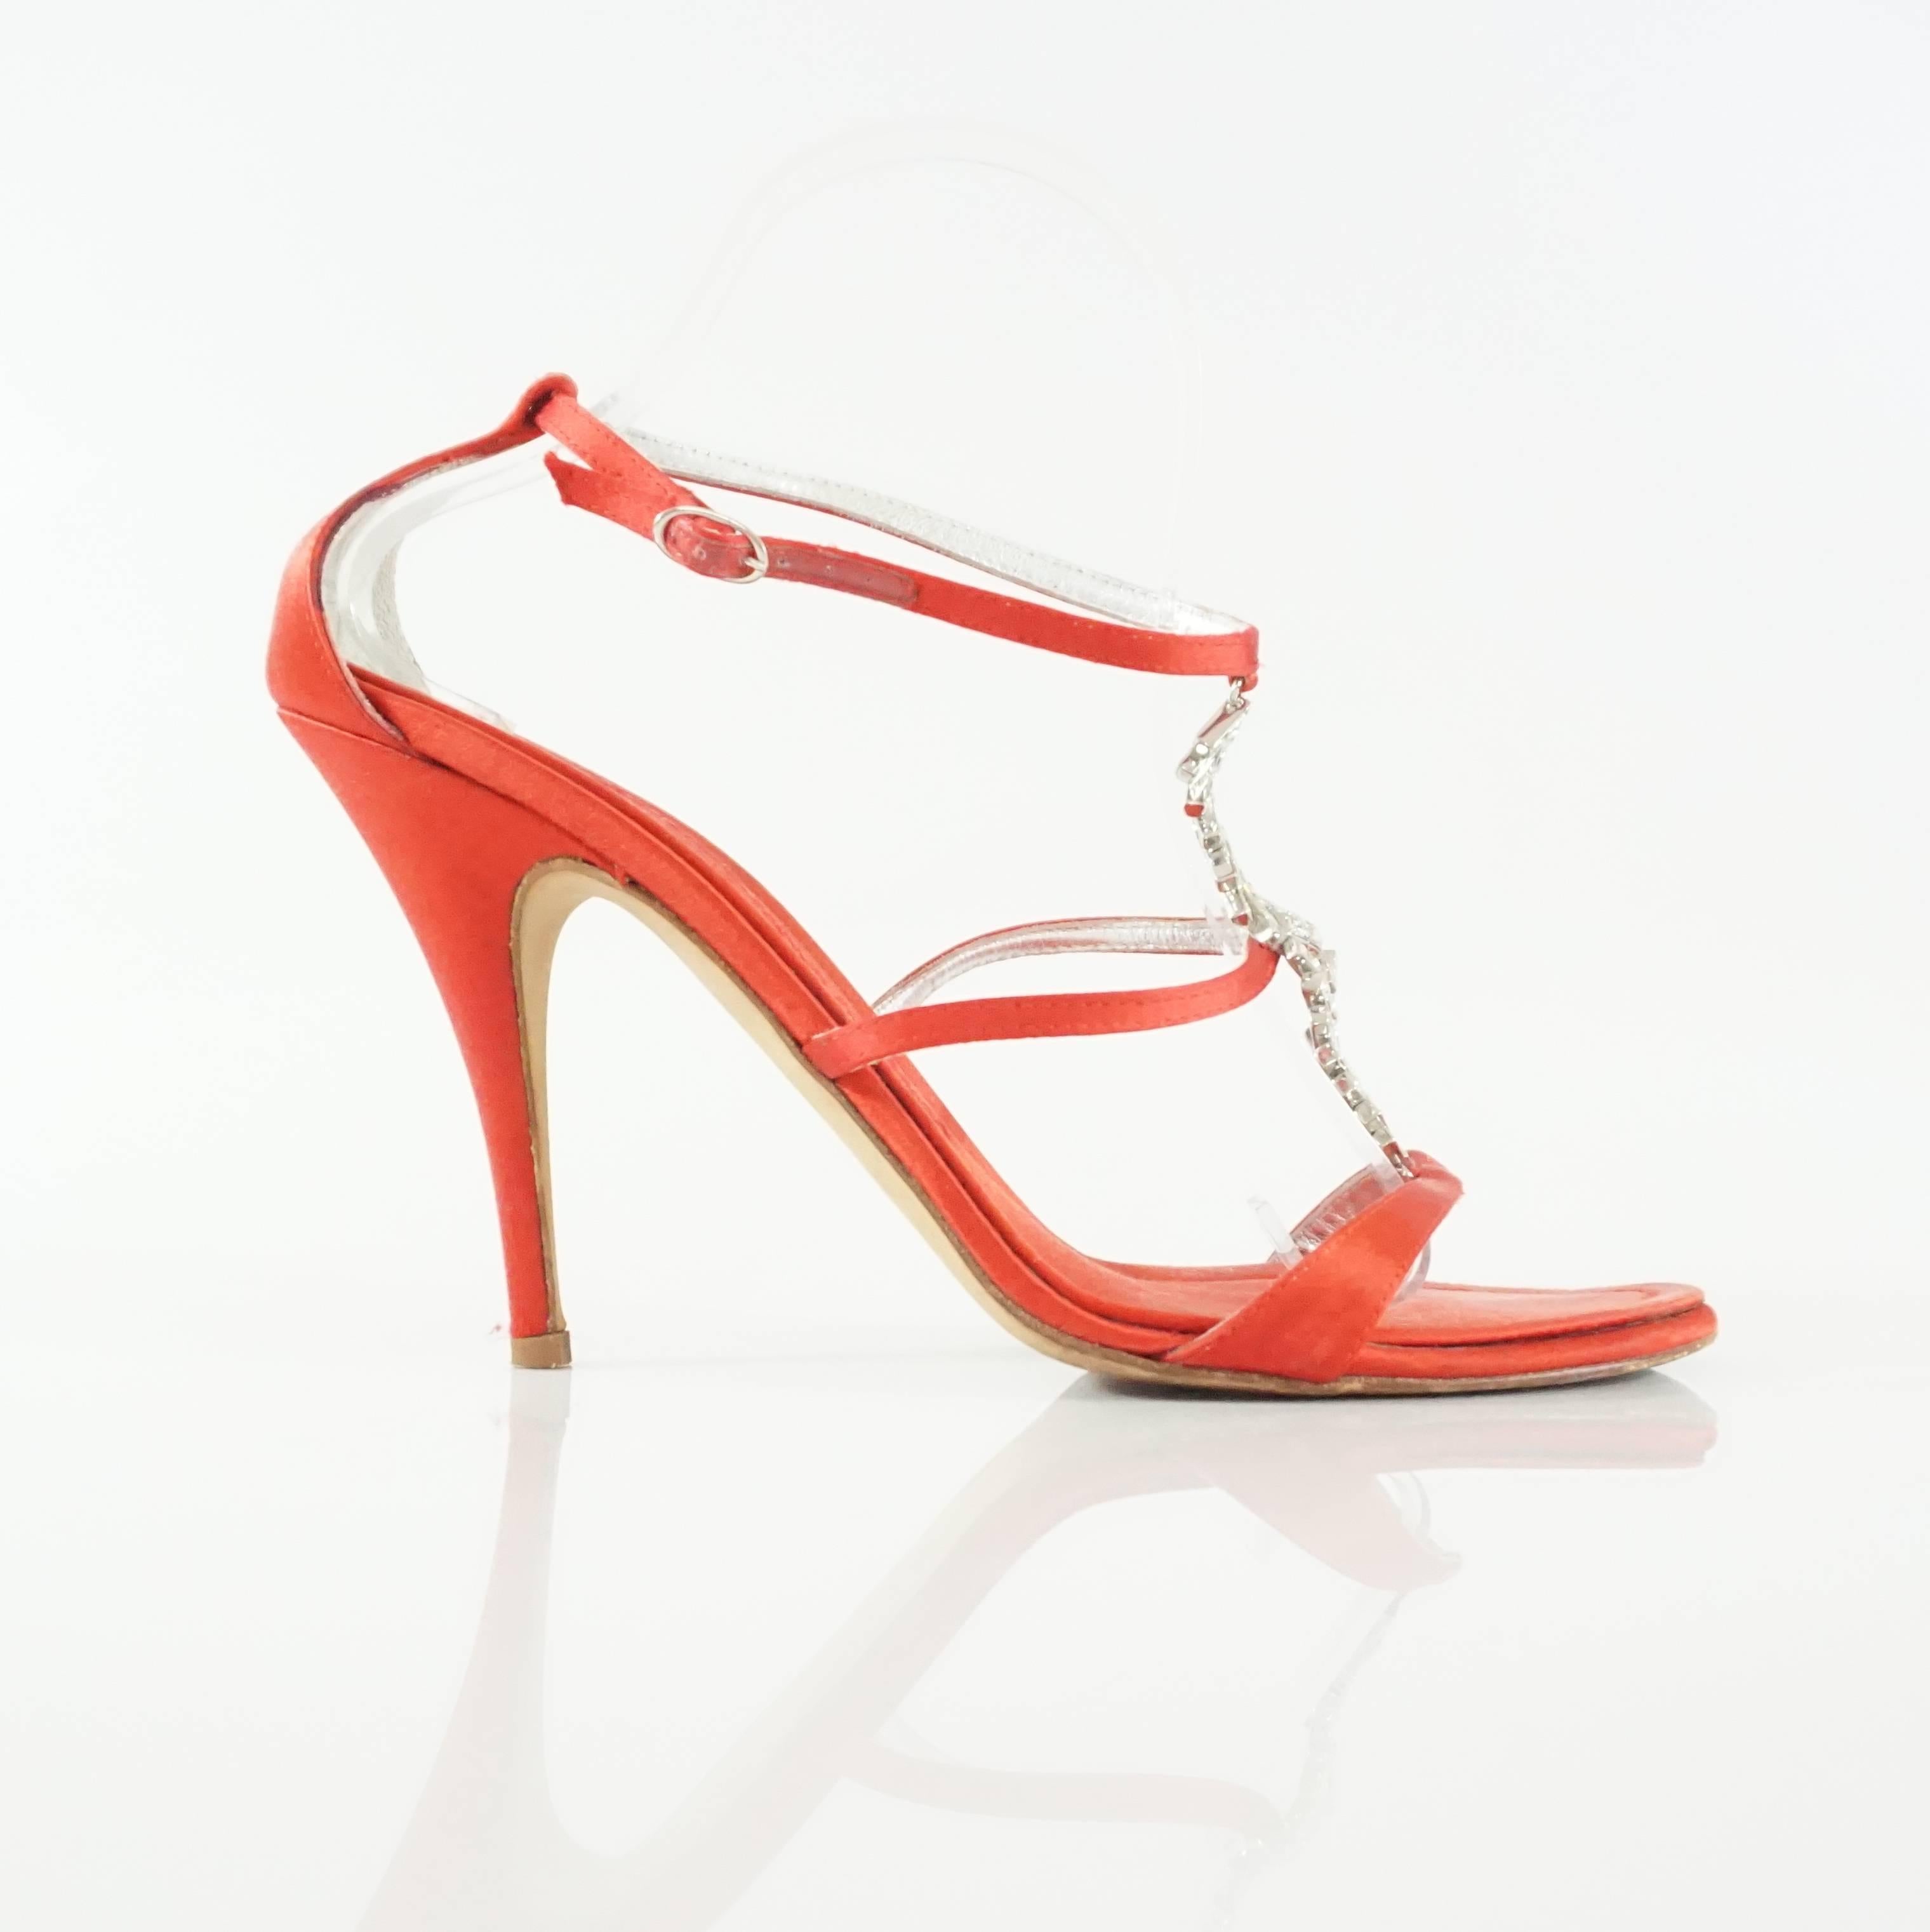 These Giuseppe Zanotti red satin sandals are strappy with a rhinestone strip in the center. The heels also have an ankle strap and small front platform. They are in excellent condition with minimal wear on the bottom and toe bed. Size 40.